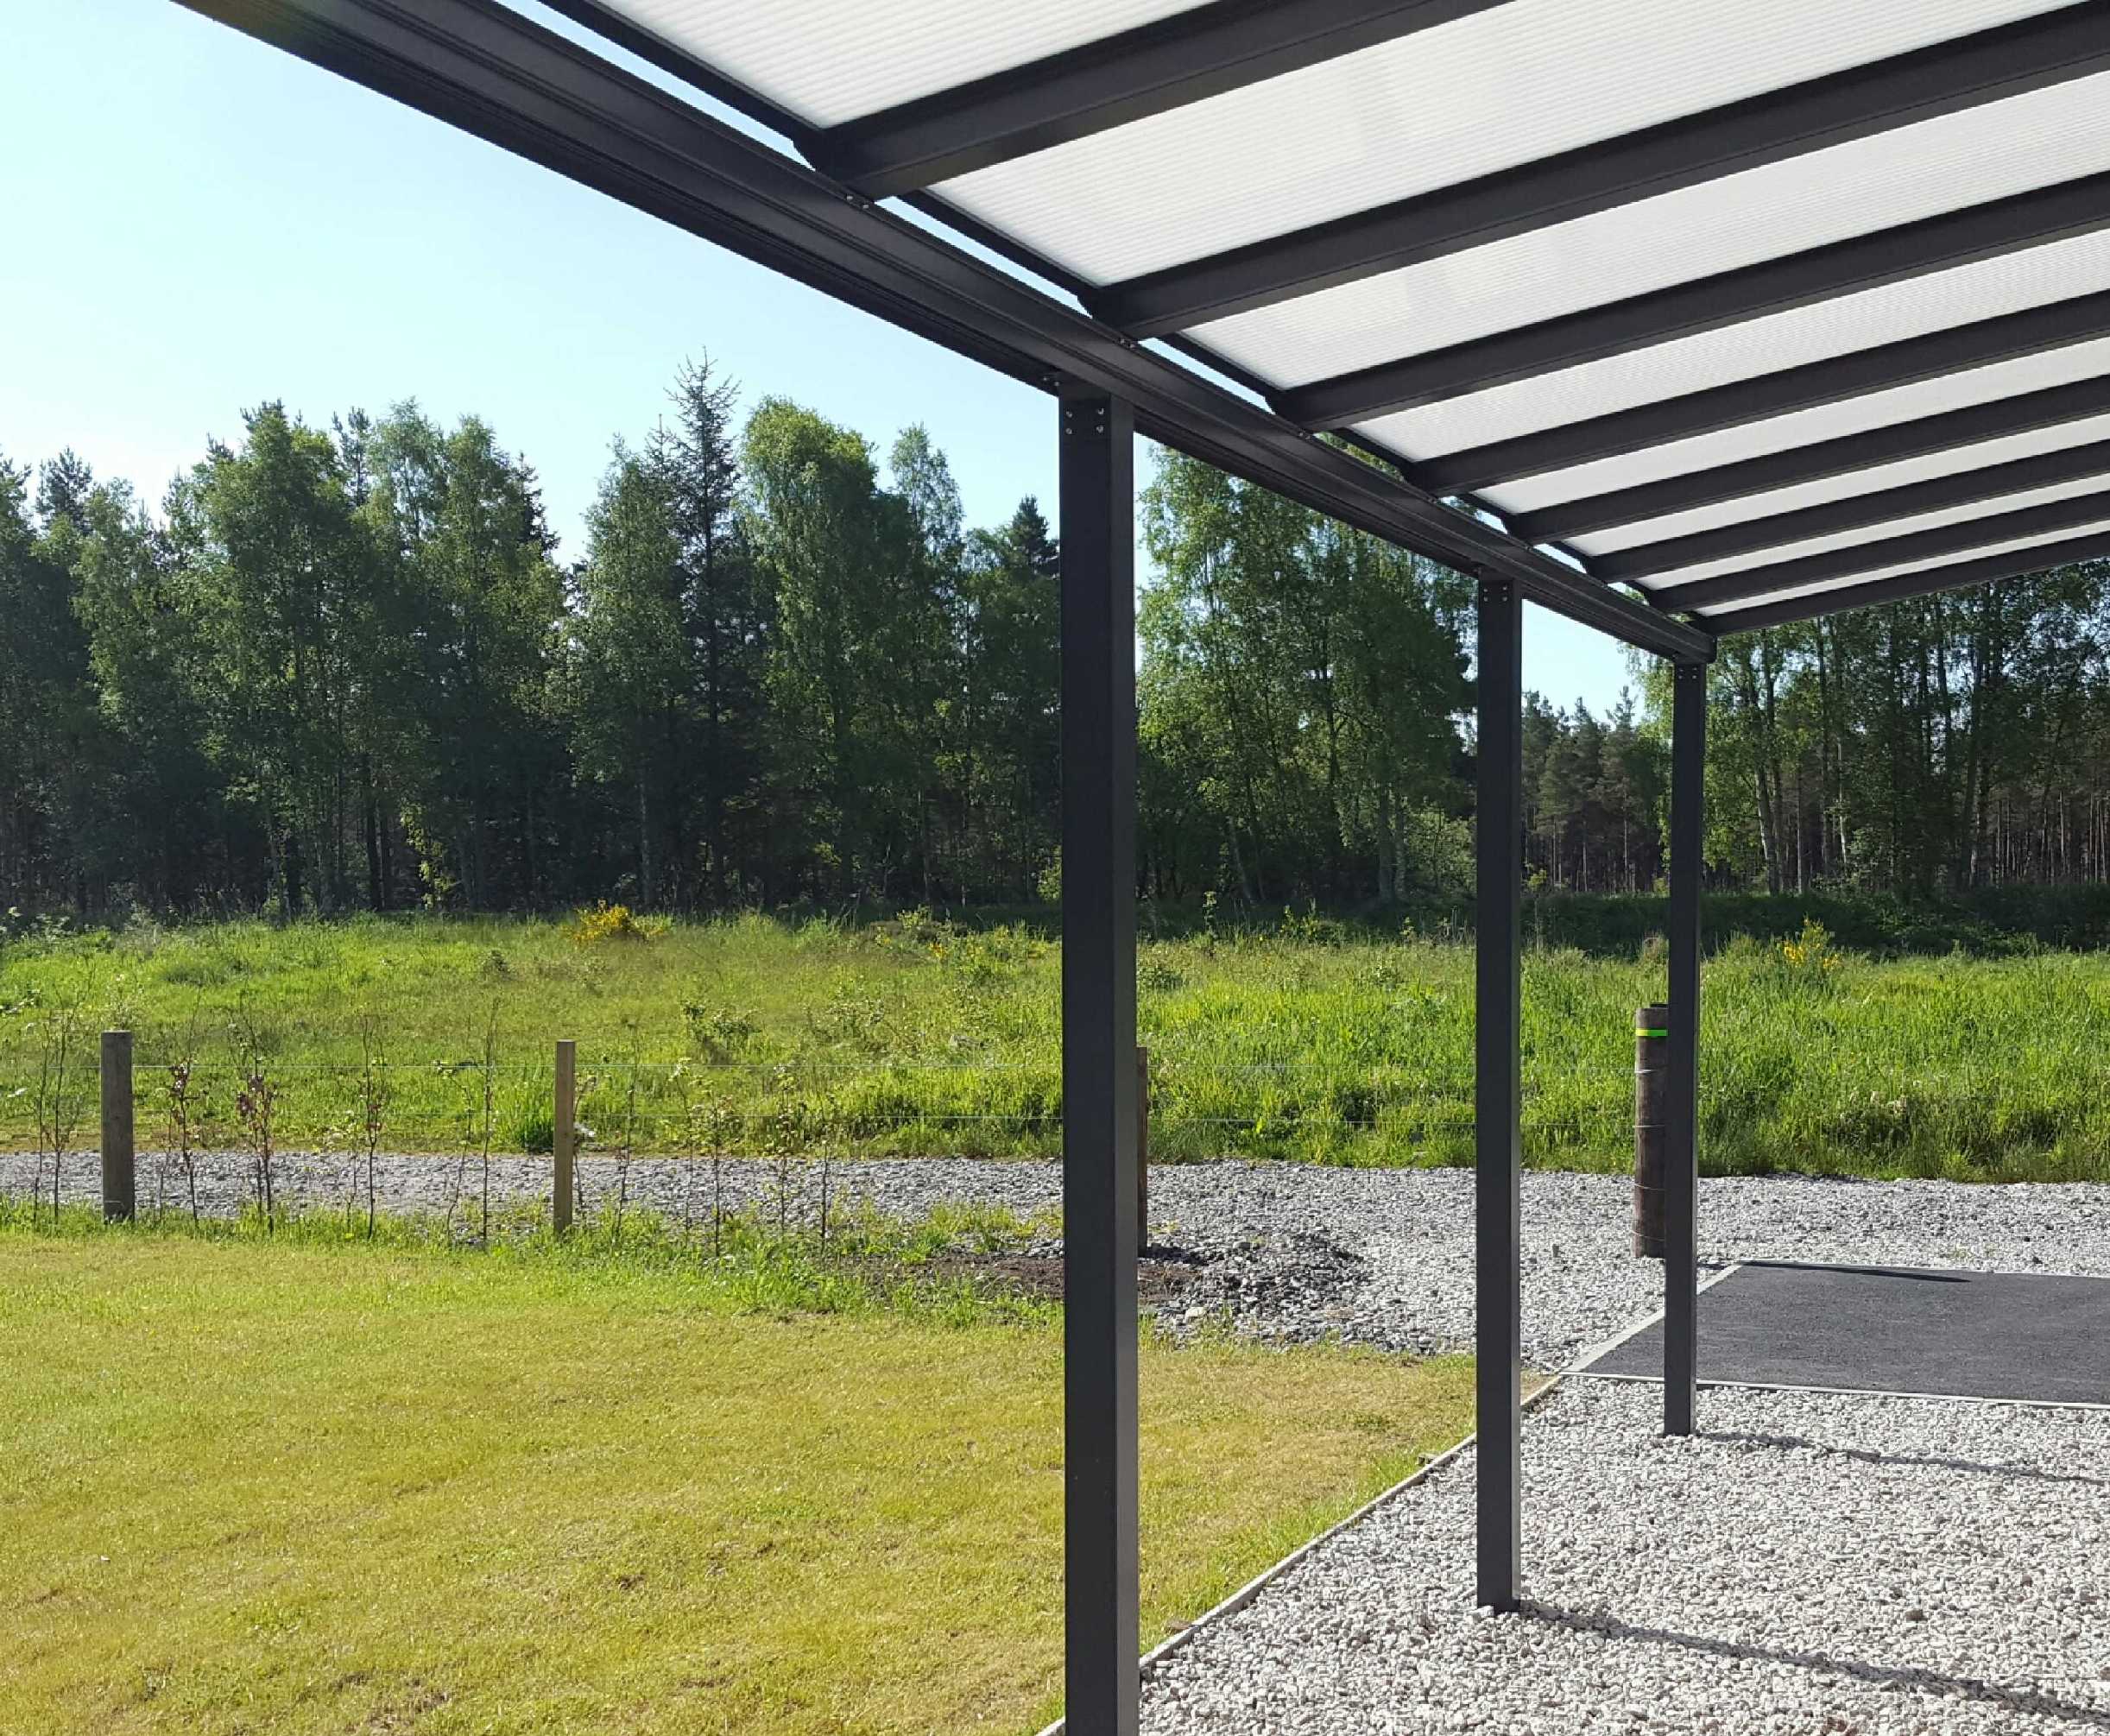 Omega Smart Lean-To Canopy, Anthracite Grey, 6mm Glass Clear Plate Polycarbonate Glazing - 7.7m (W) x 1.5m (P), (4) Supporting Posts